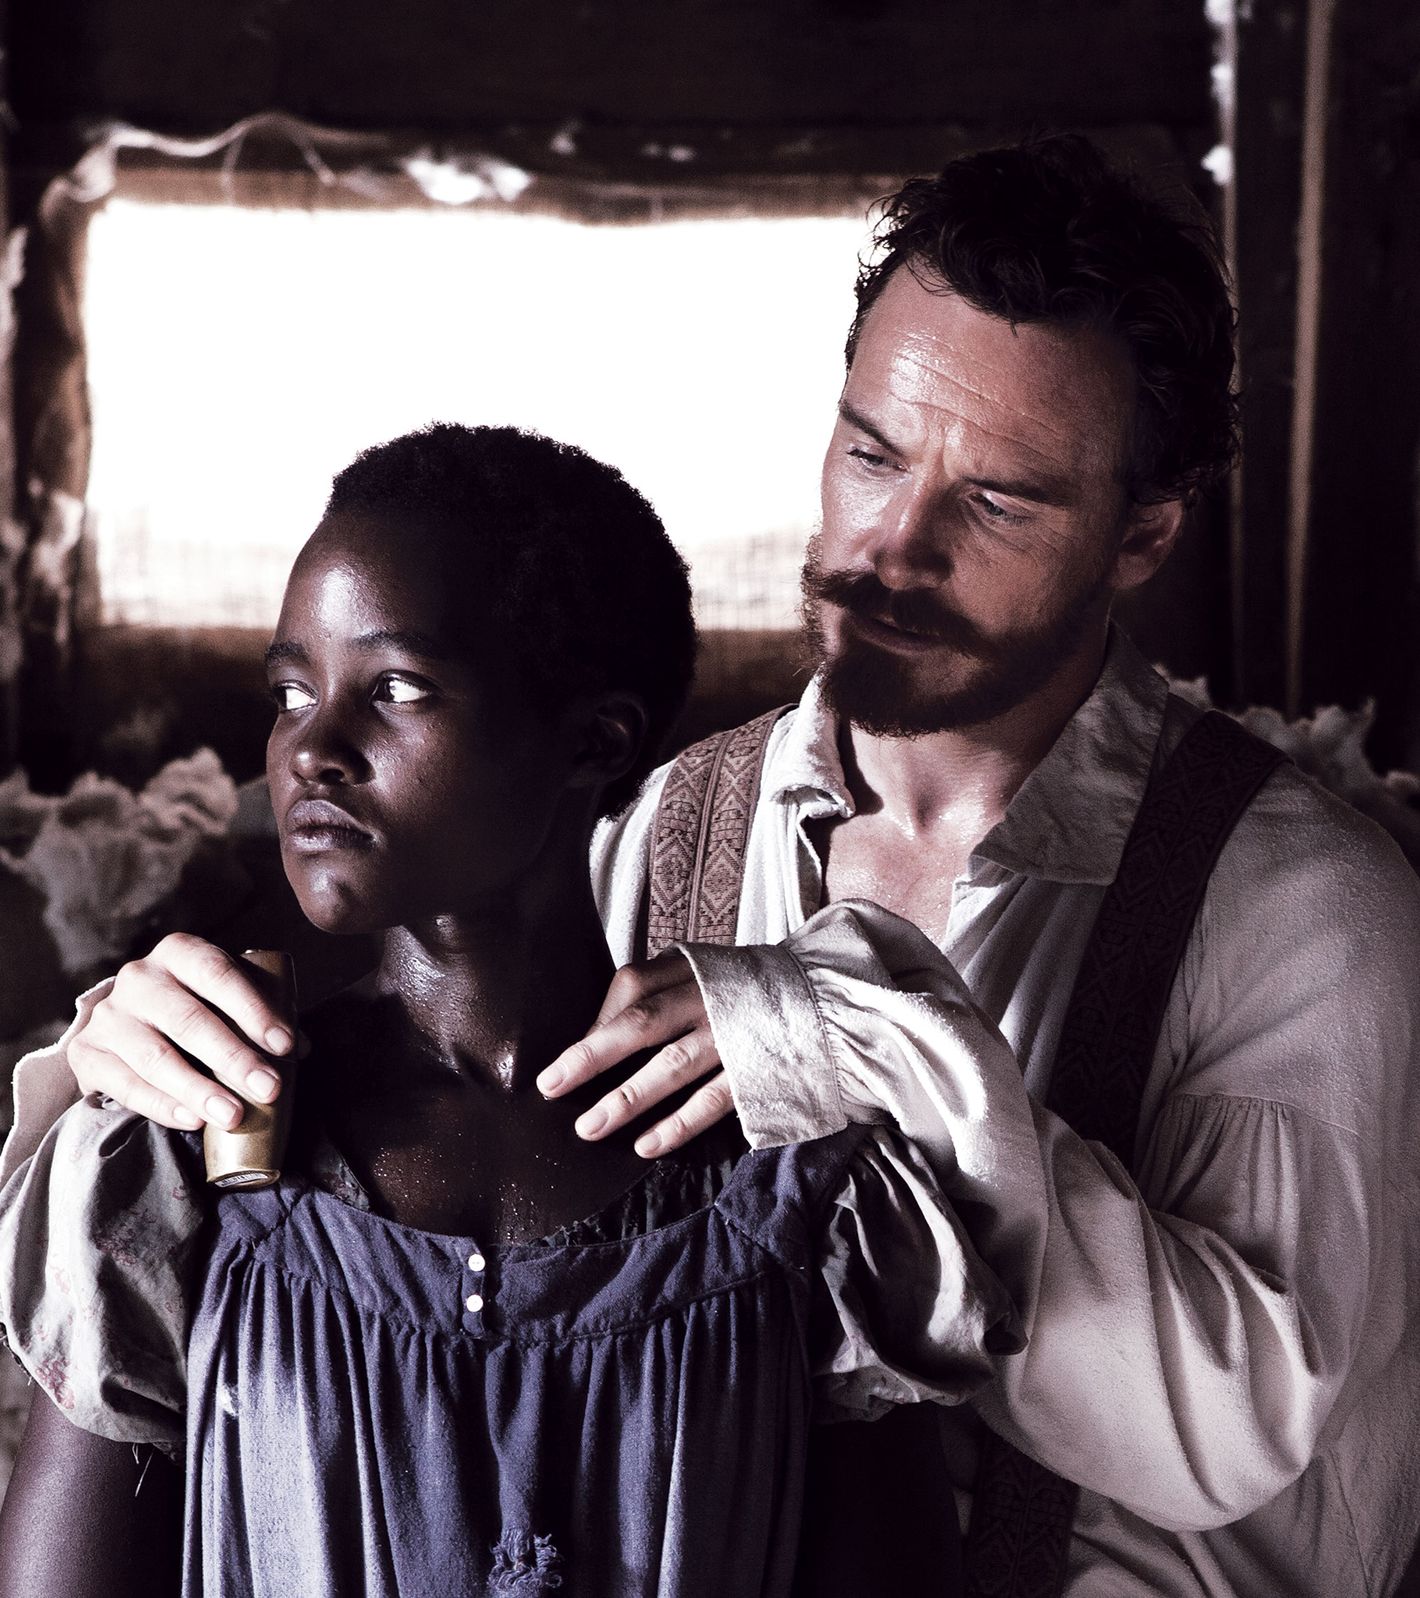 Steve McQueen on 12 Years a Slave image